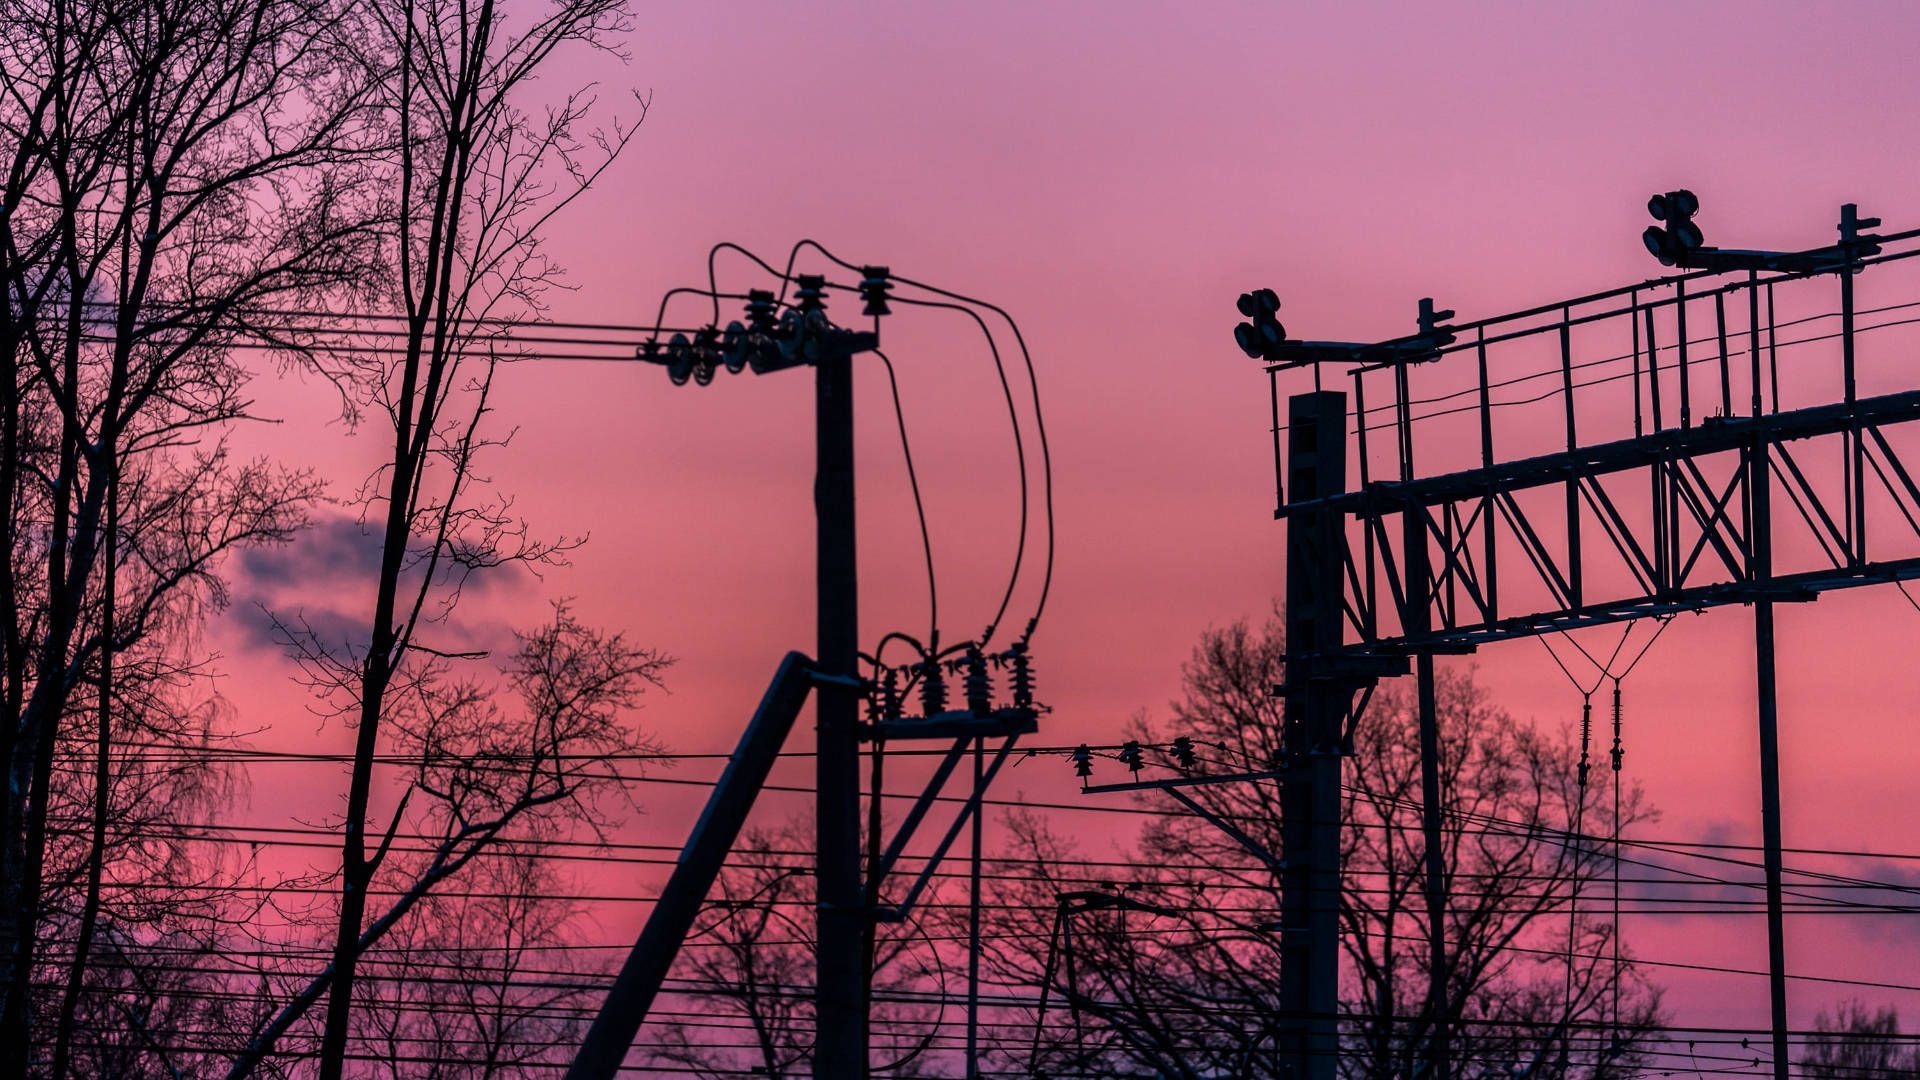 Electric wires and poles against a pink sky - 1920x1080